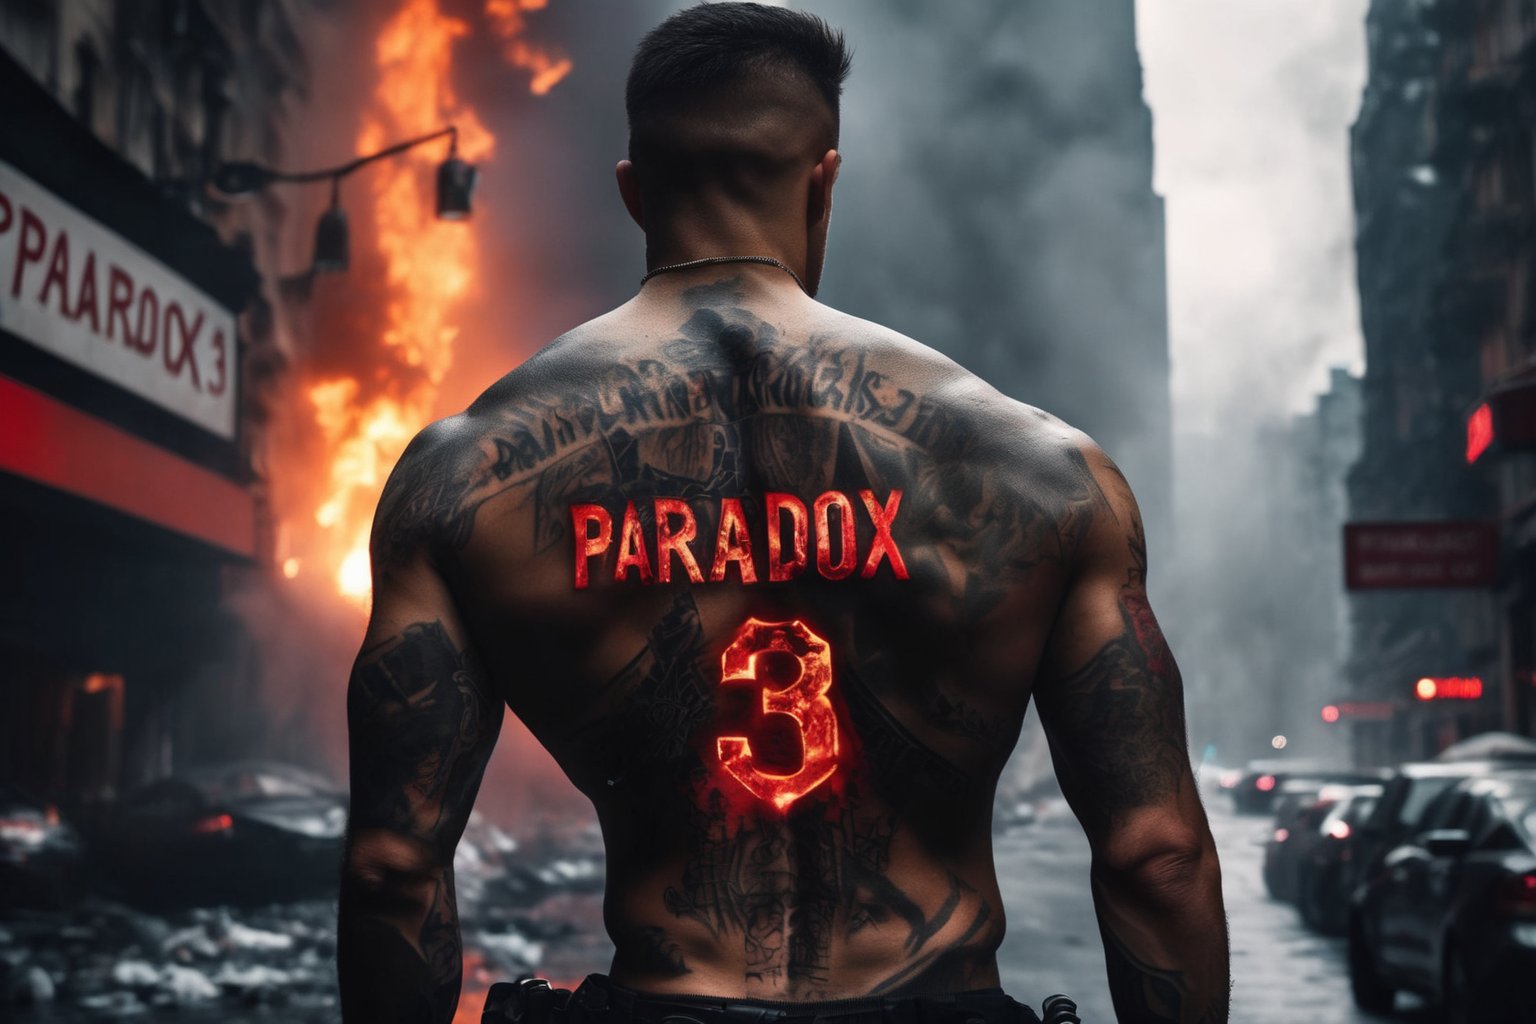 a cyberpunk soldier standing in a war city on fire, no shirt, with a tattoo on his back, with the huge red tattoo text: "PARADOX 3"